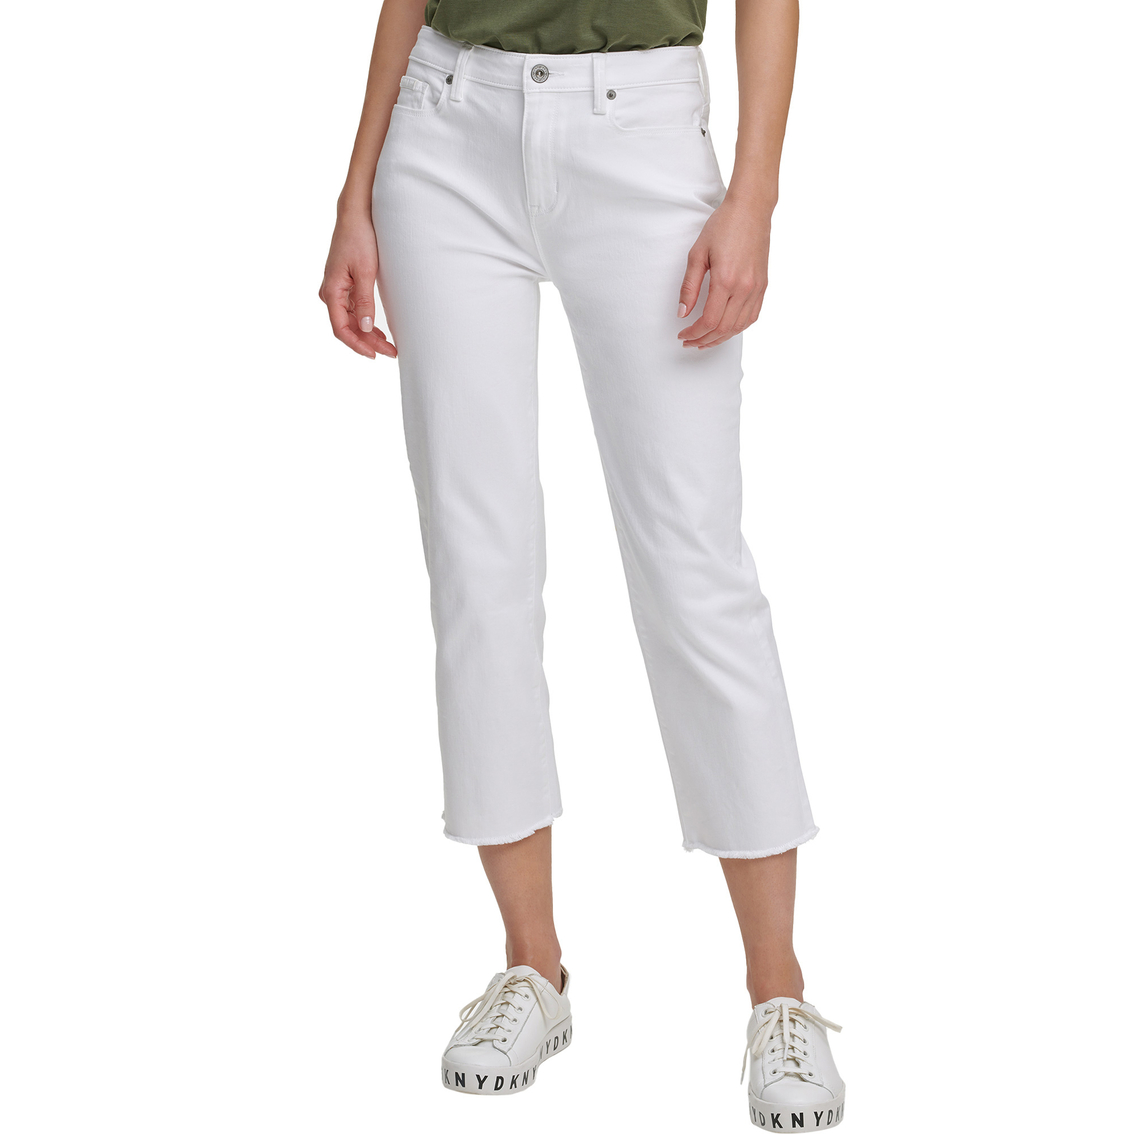 Dkny Foundation Slim Straight Cropped Pants | Pants | Clothing ...